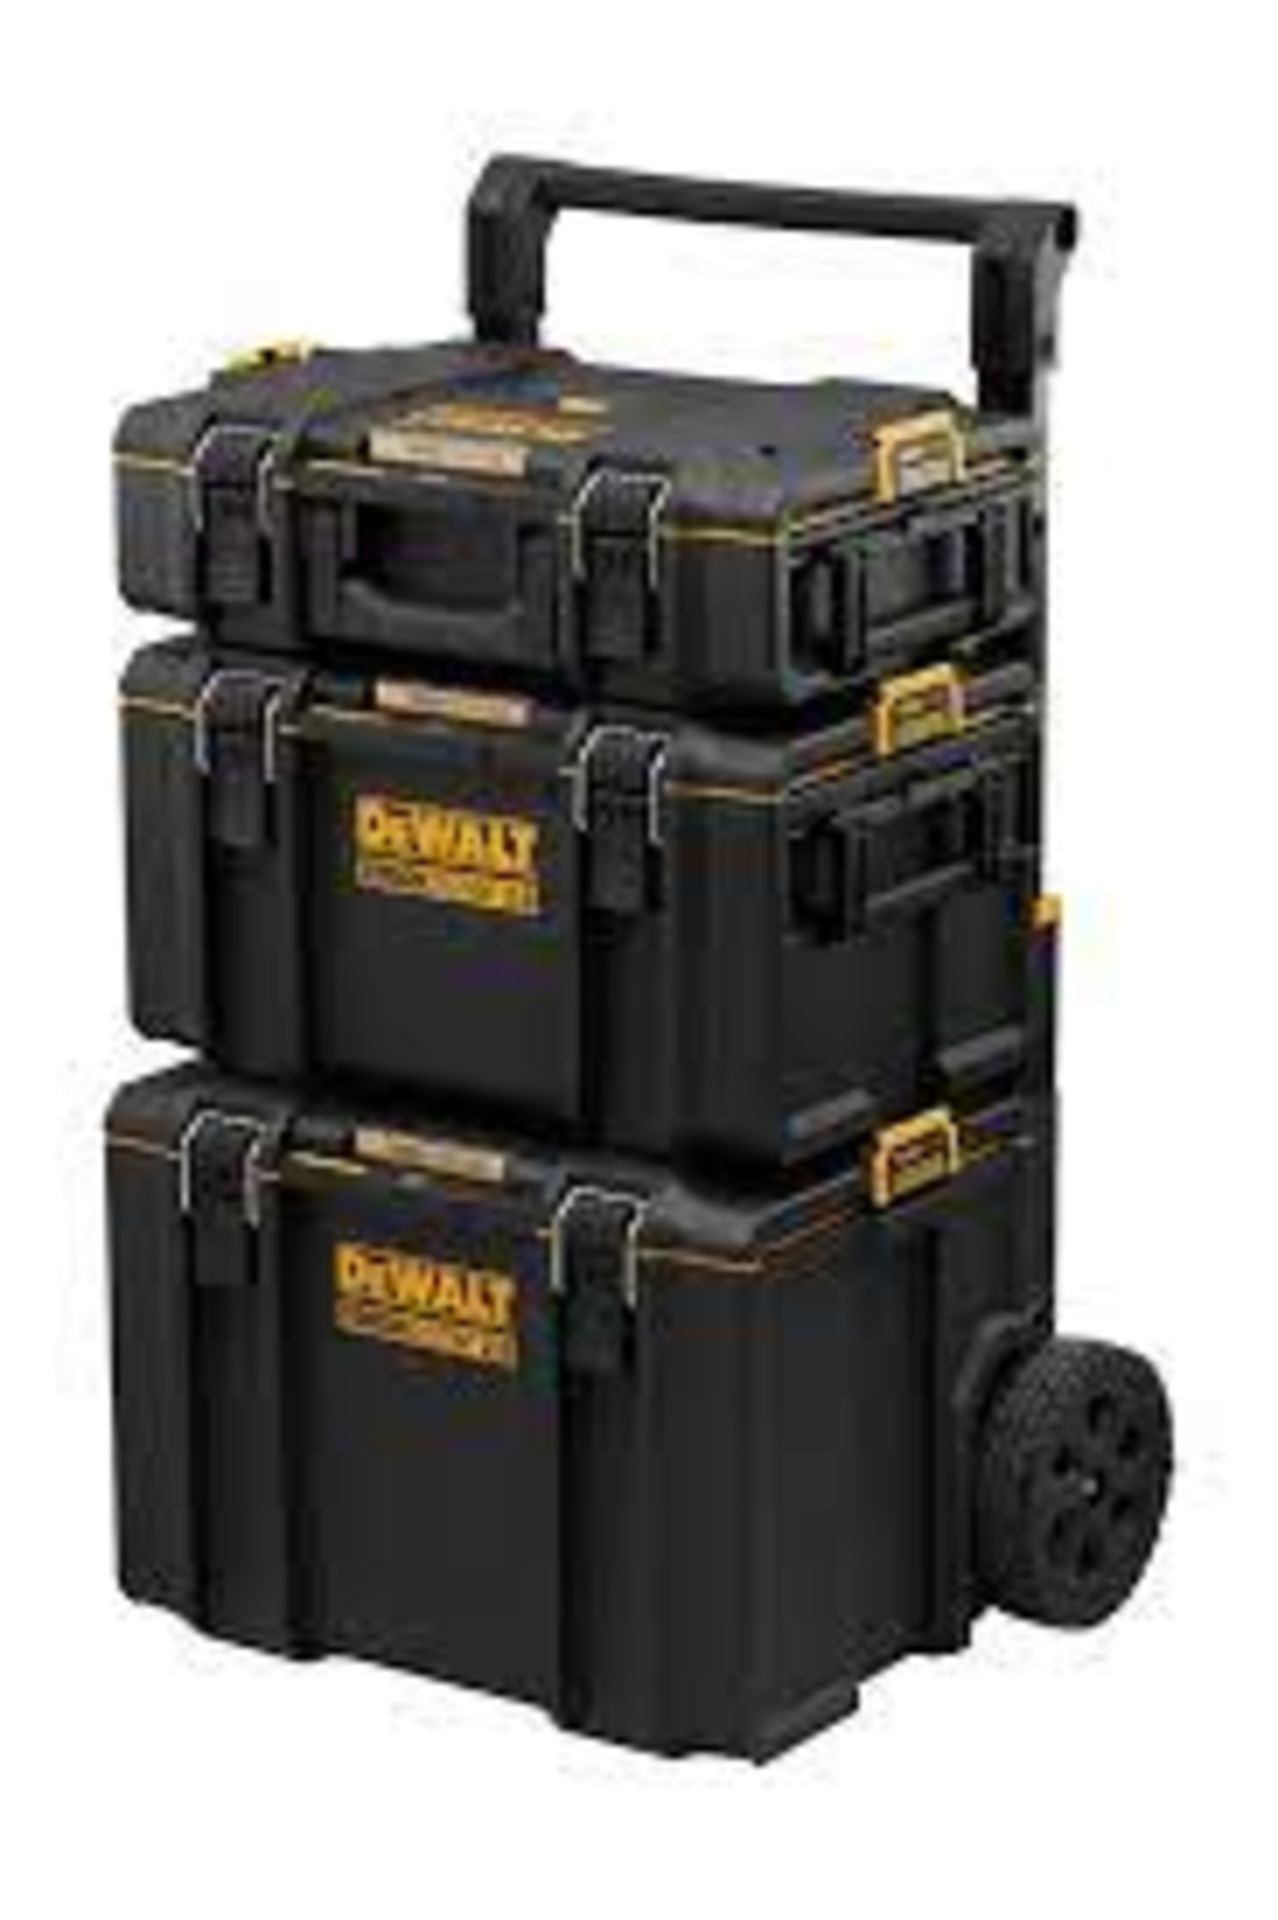 DeWalt ToughSystem 2 Storage Tower 3 Pcs. - ER48. Storage system that protects tools from the